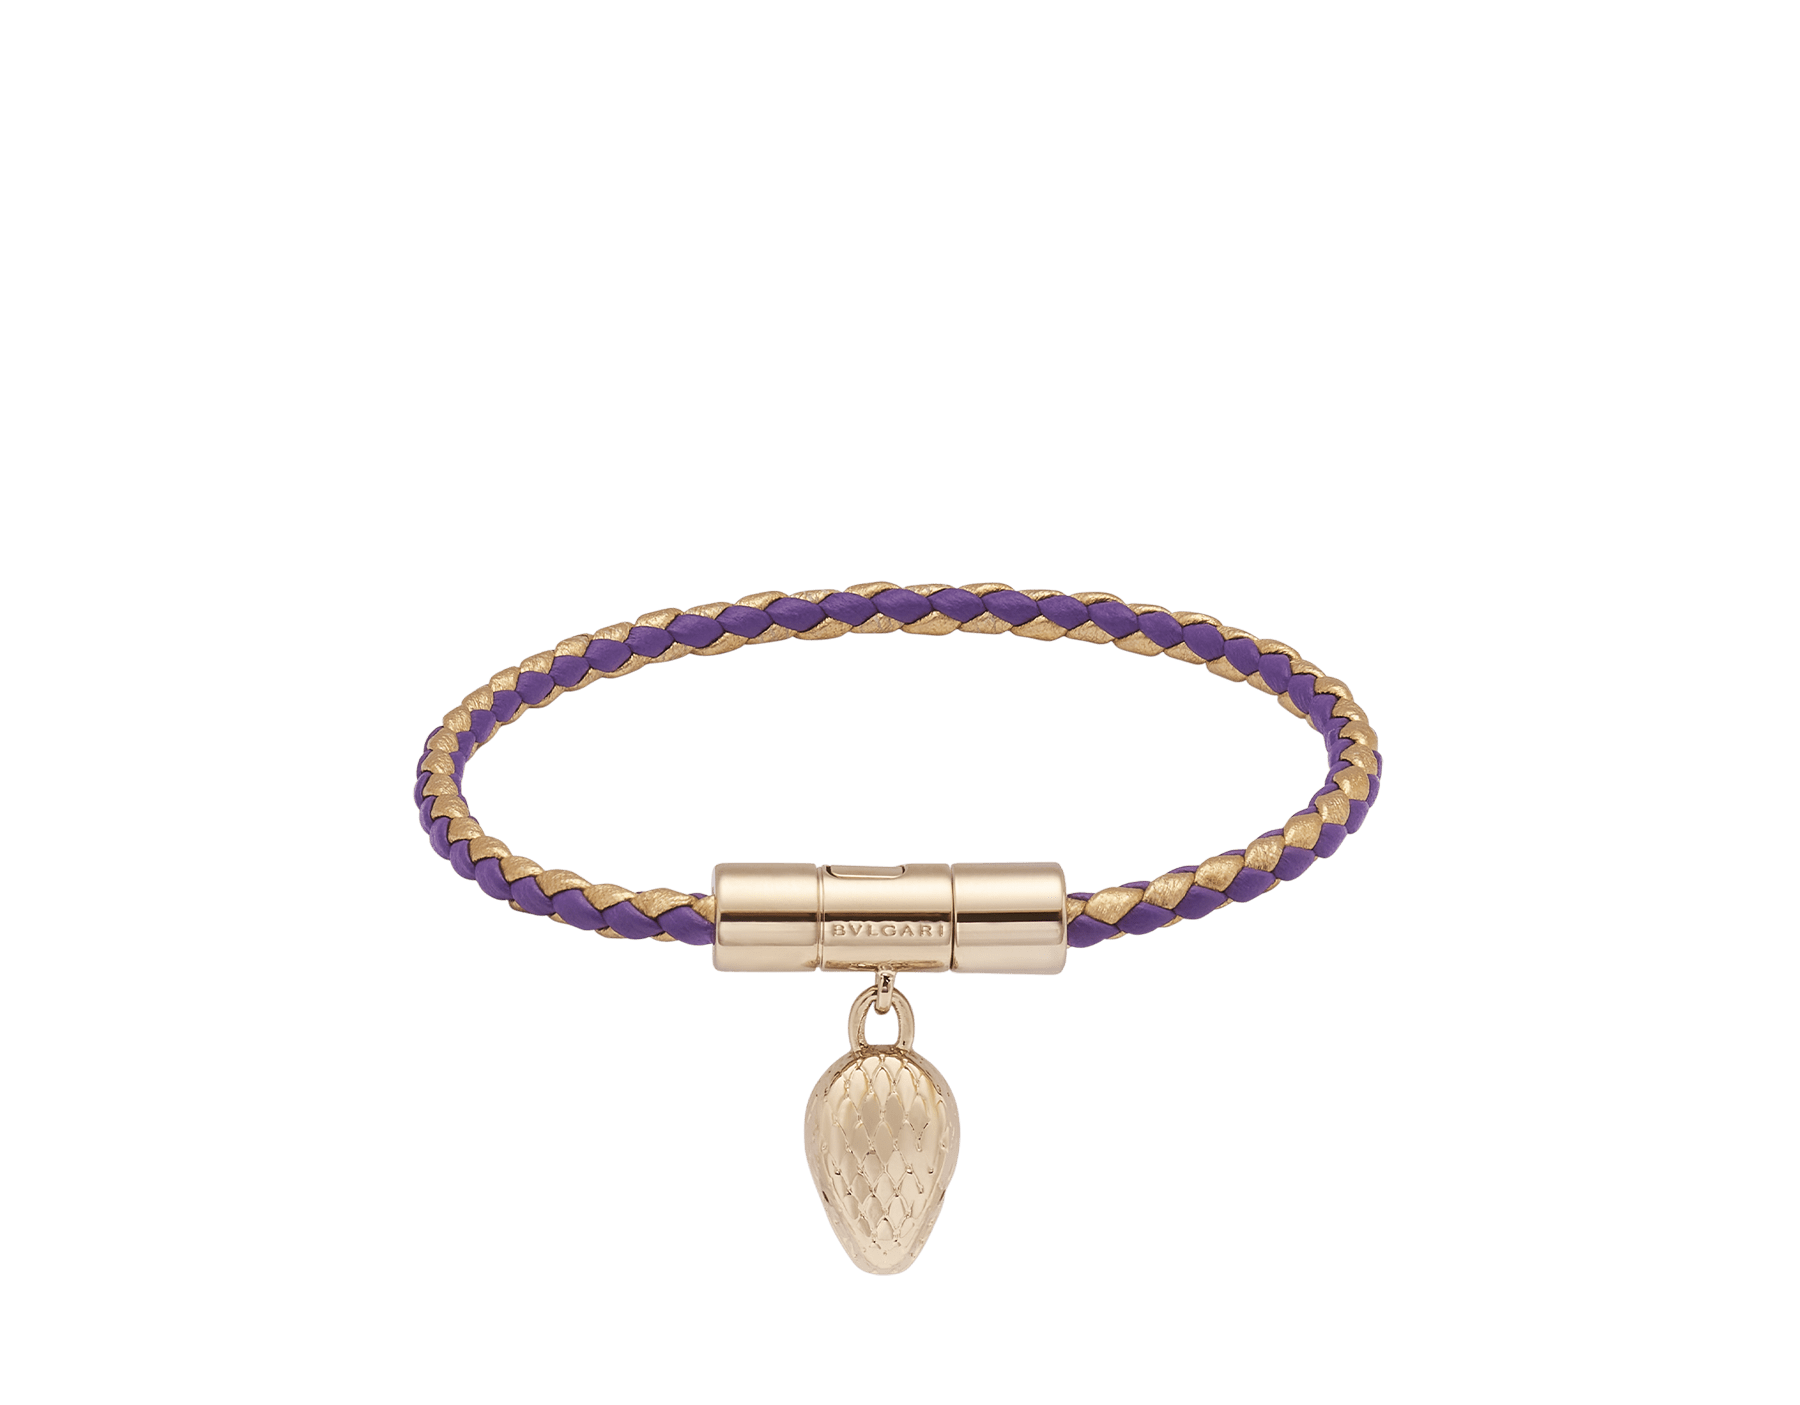 Serpenti Forever bracelet in vivid, dark amethyst purple and gold braided calf leather. Captivating light gold-plated brass snakehead charm embellished with red enamel eyes, attached to the front clasp. SERPHERBRAID-WCL-VA image 1